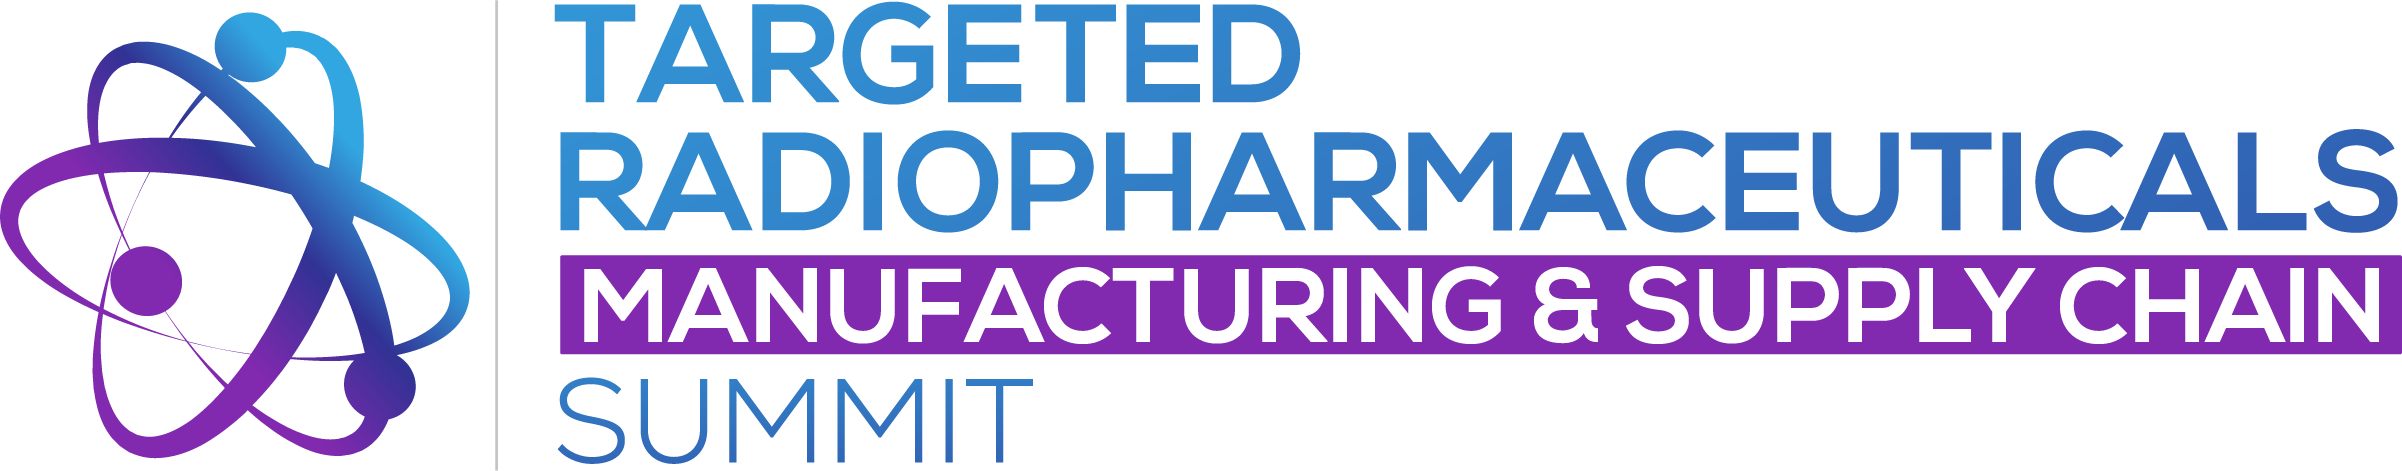 34189 - TRP Manufacturing & Supply Chain Summit brochure _Revised